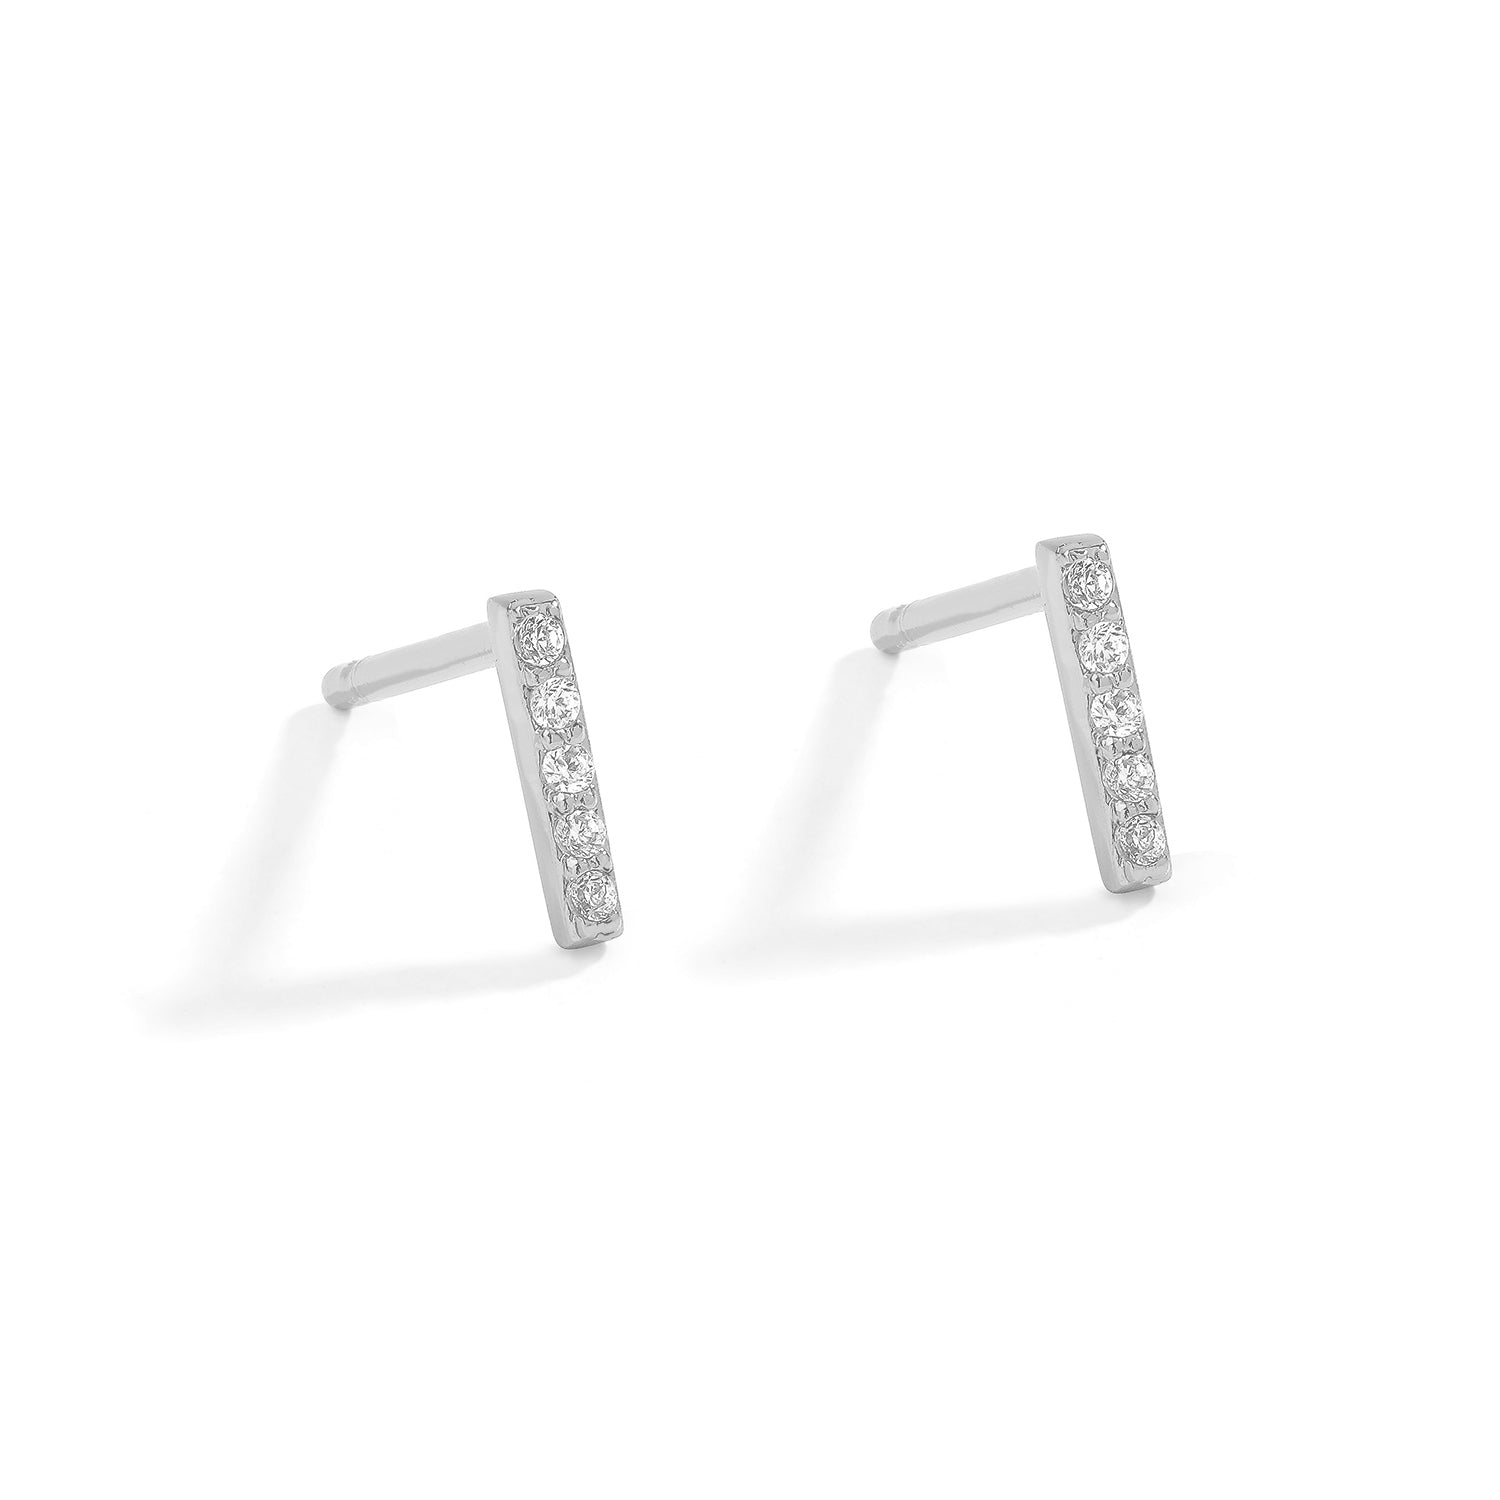 Dainty and minimalist initial studs. 925 silver earrings.